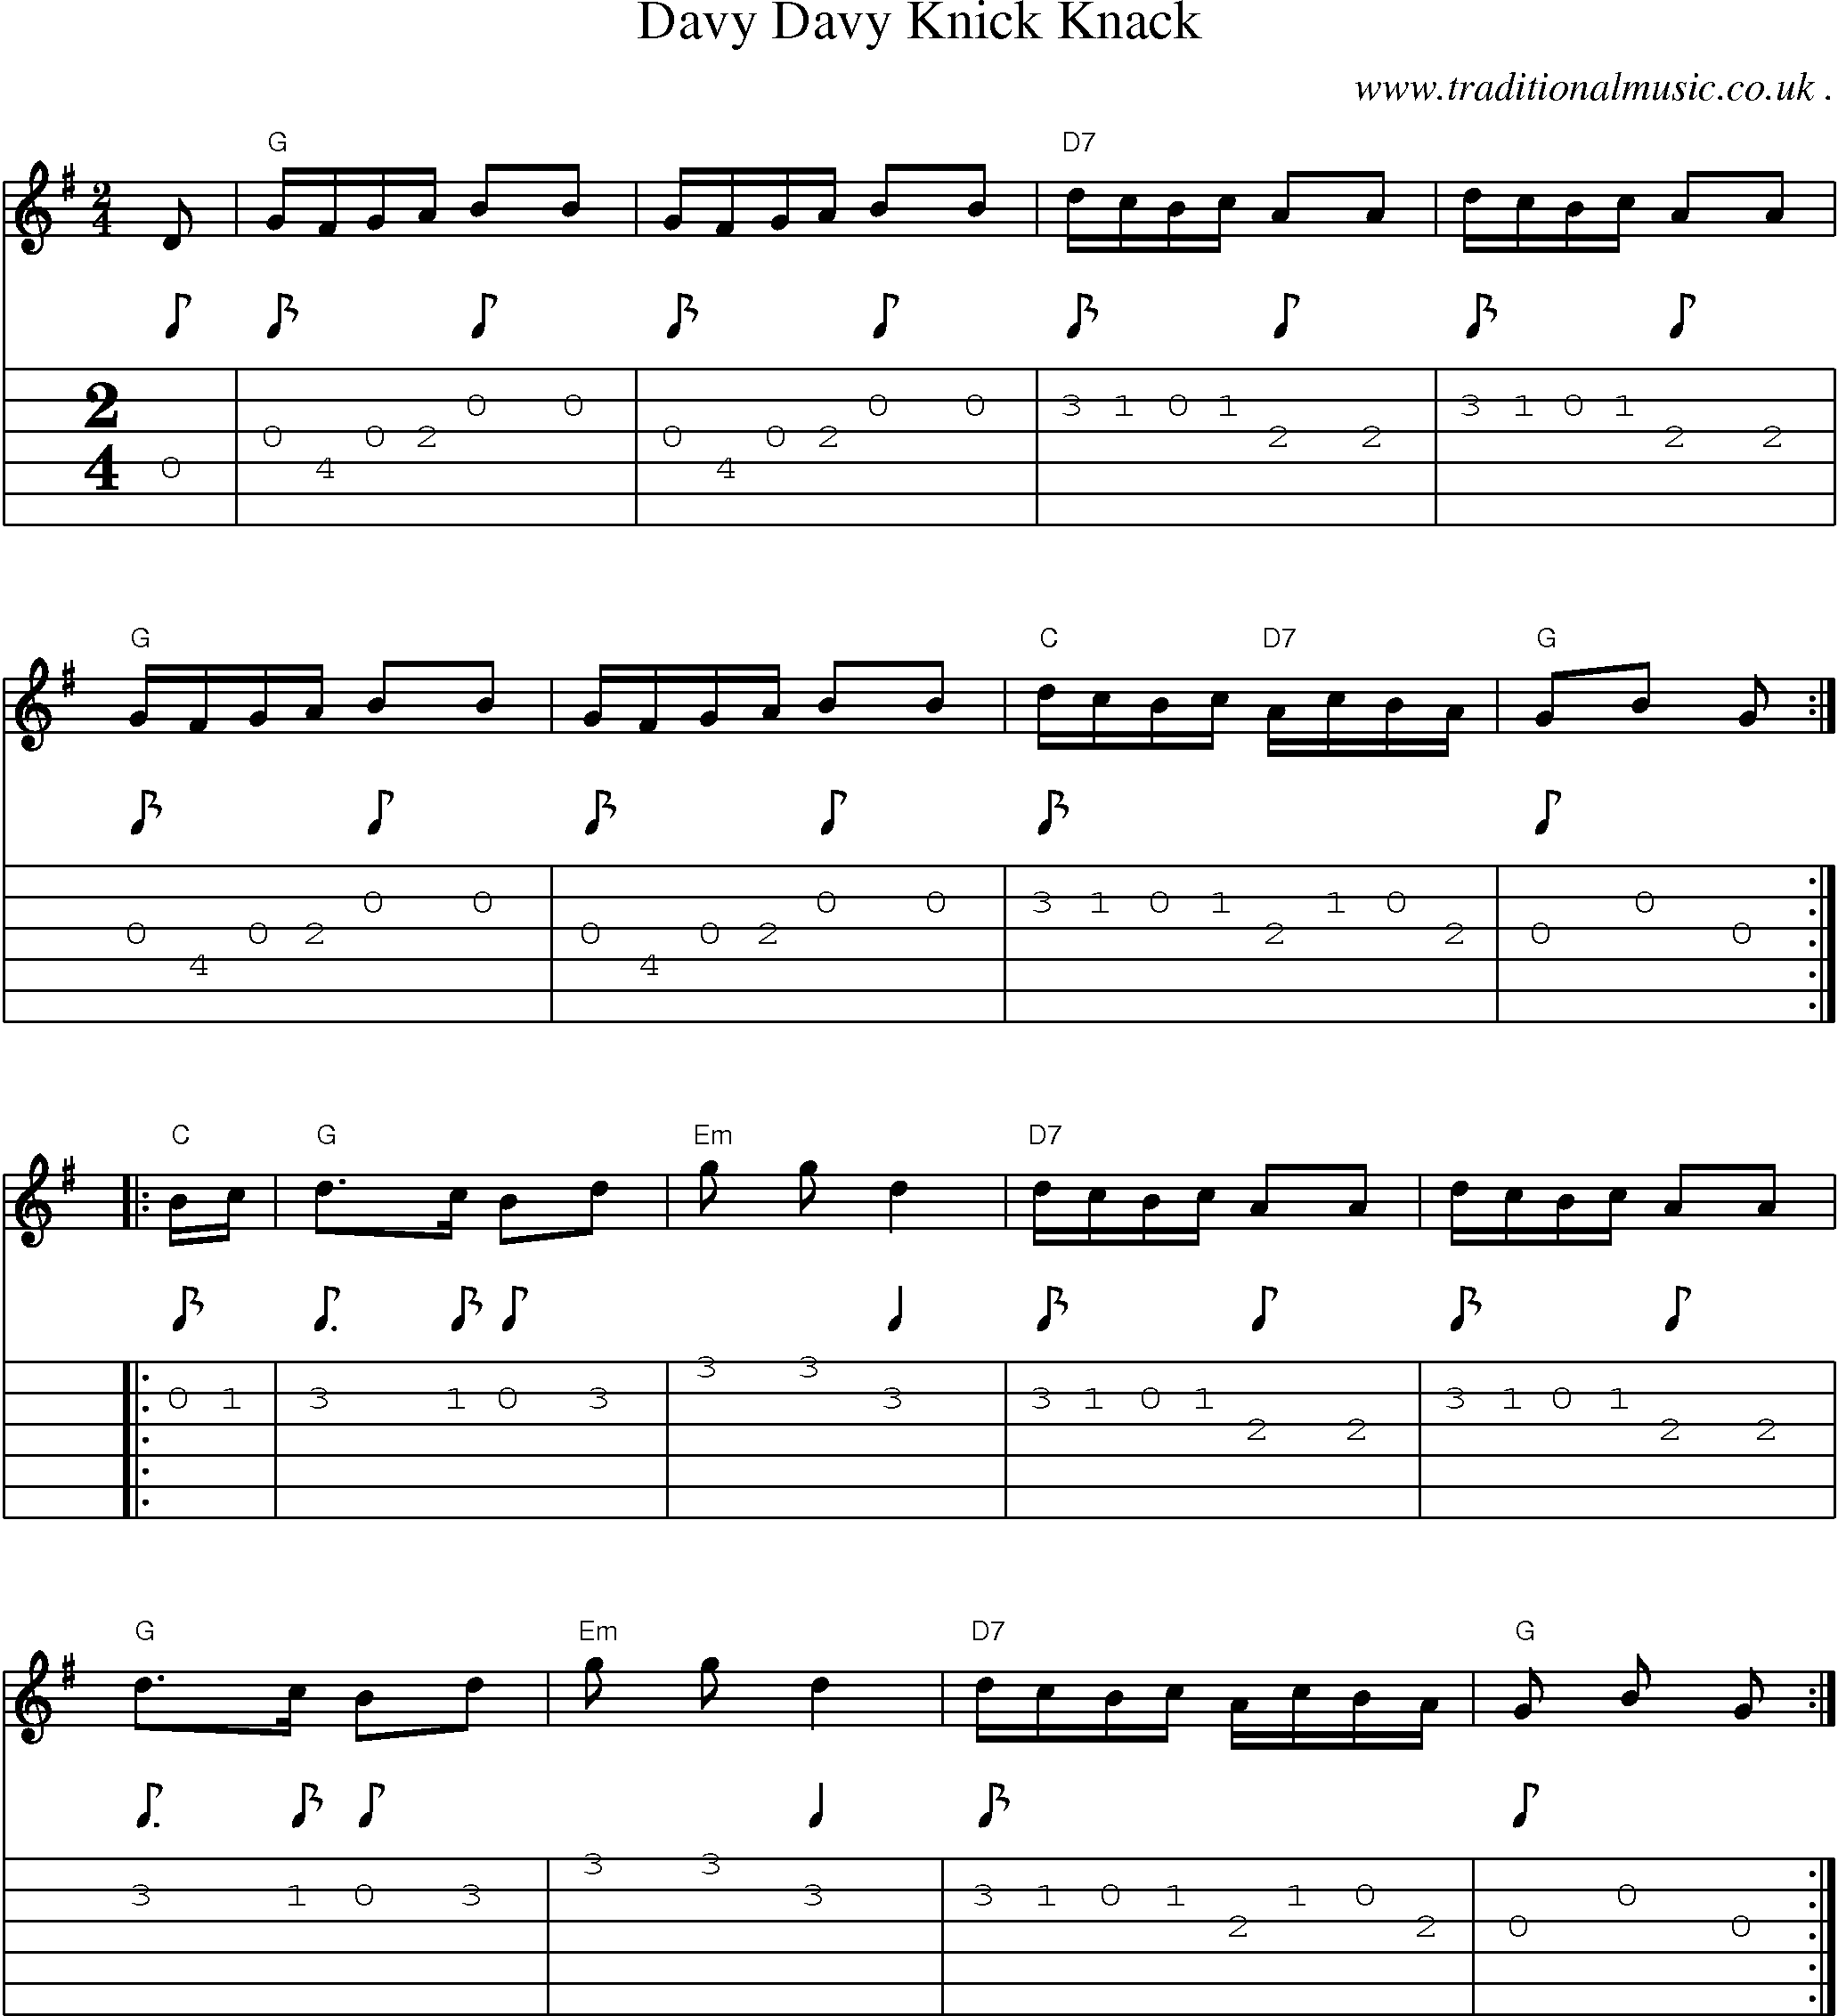 Music Score and Guitar Tabs for Davy Davy Knick Knack